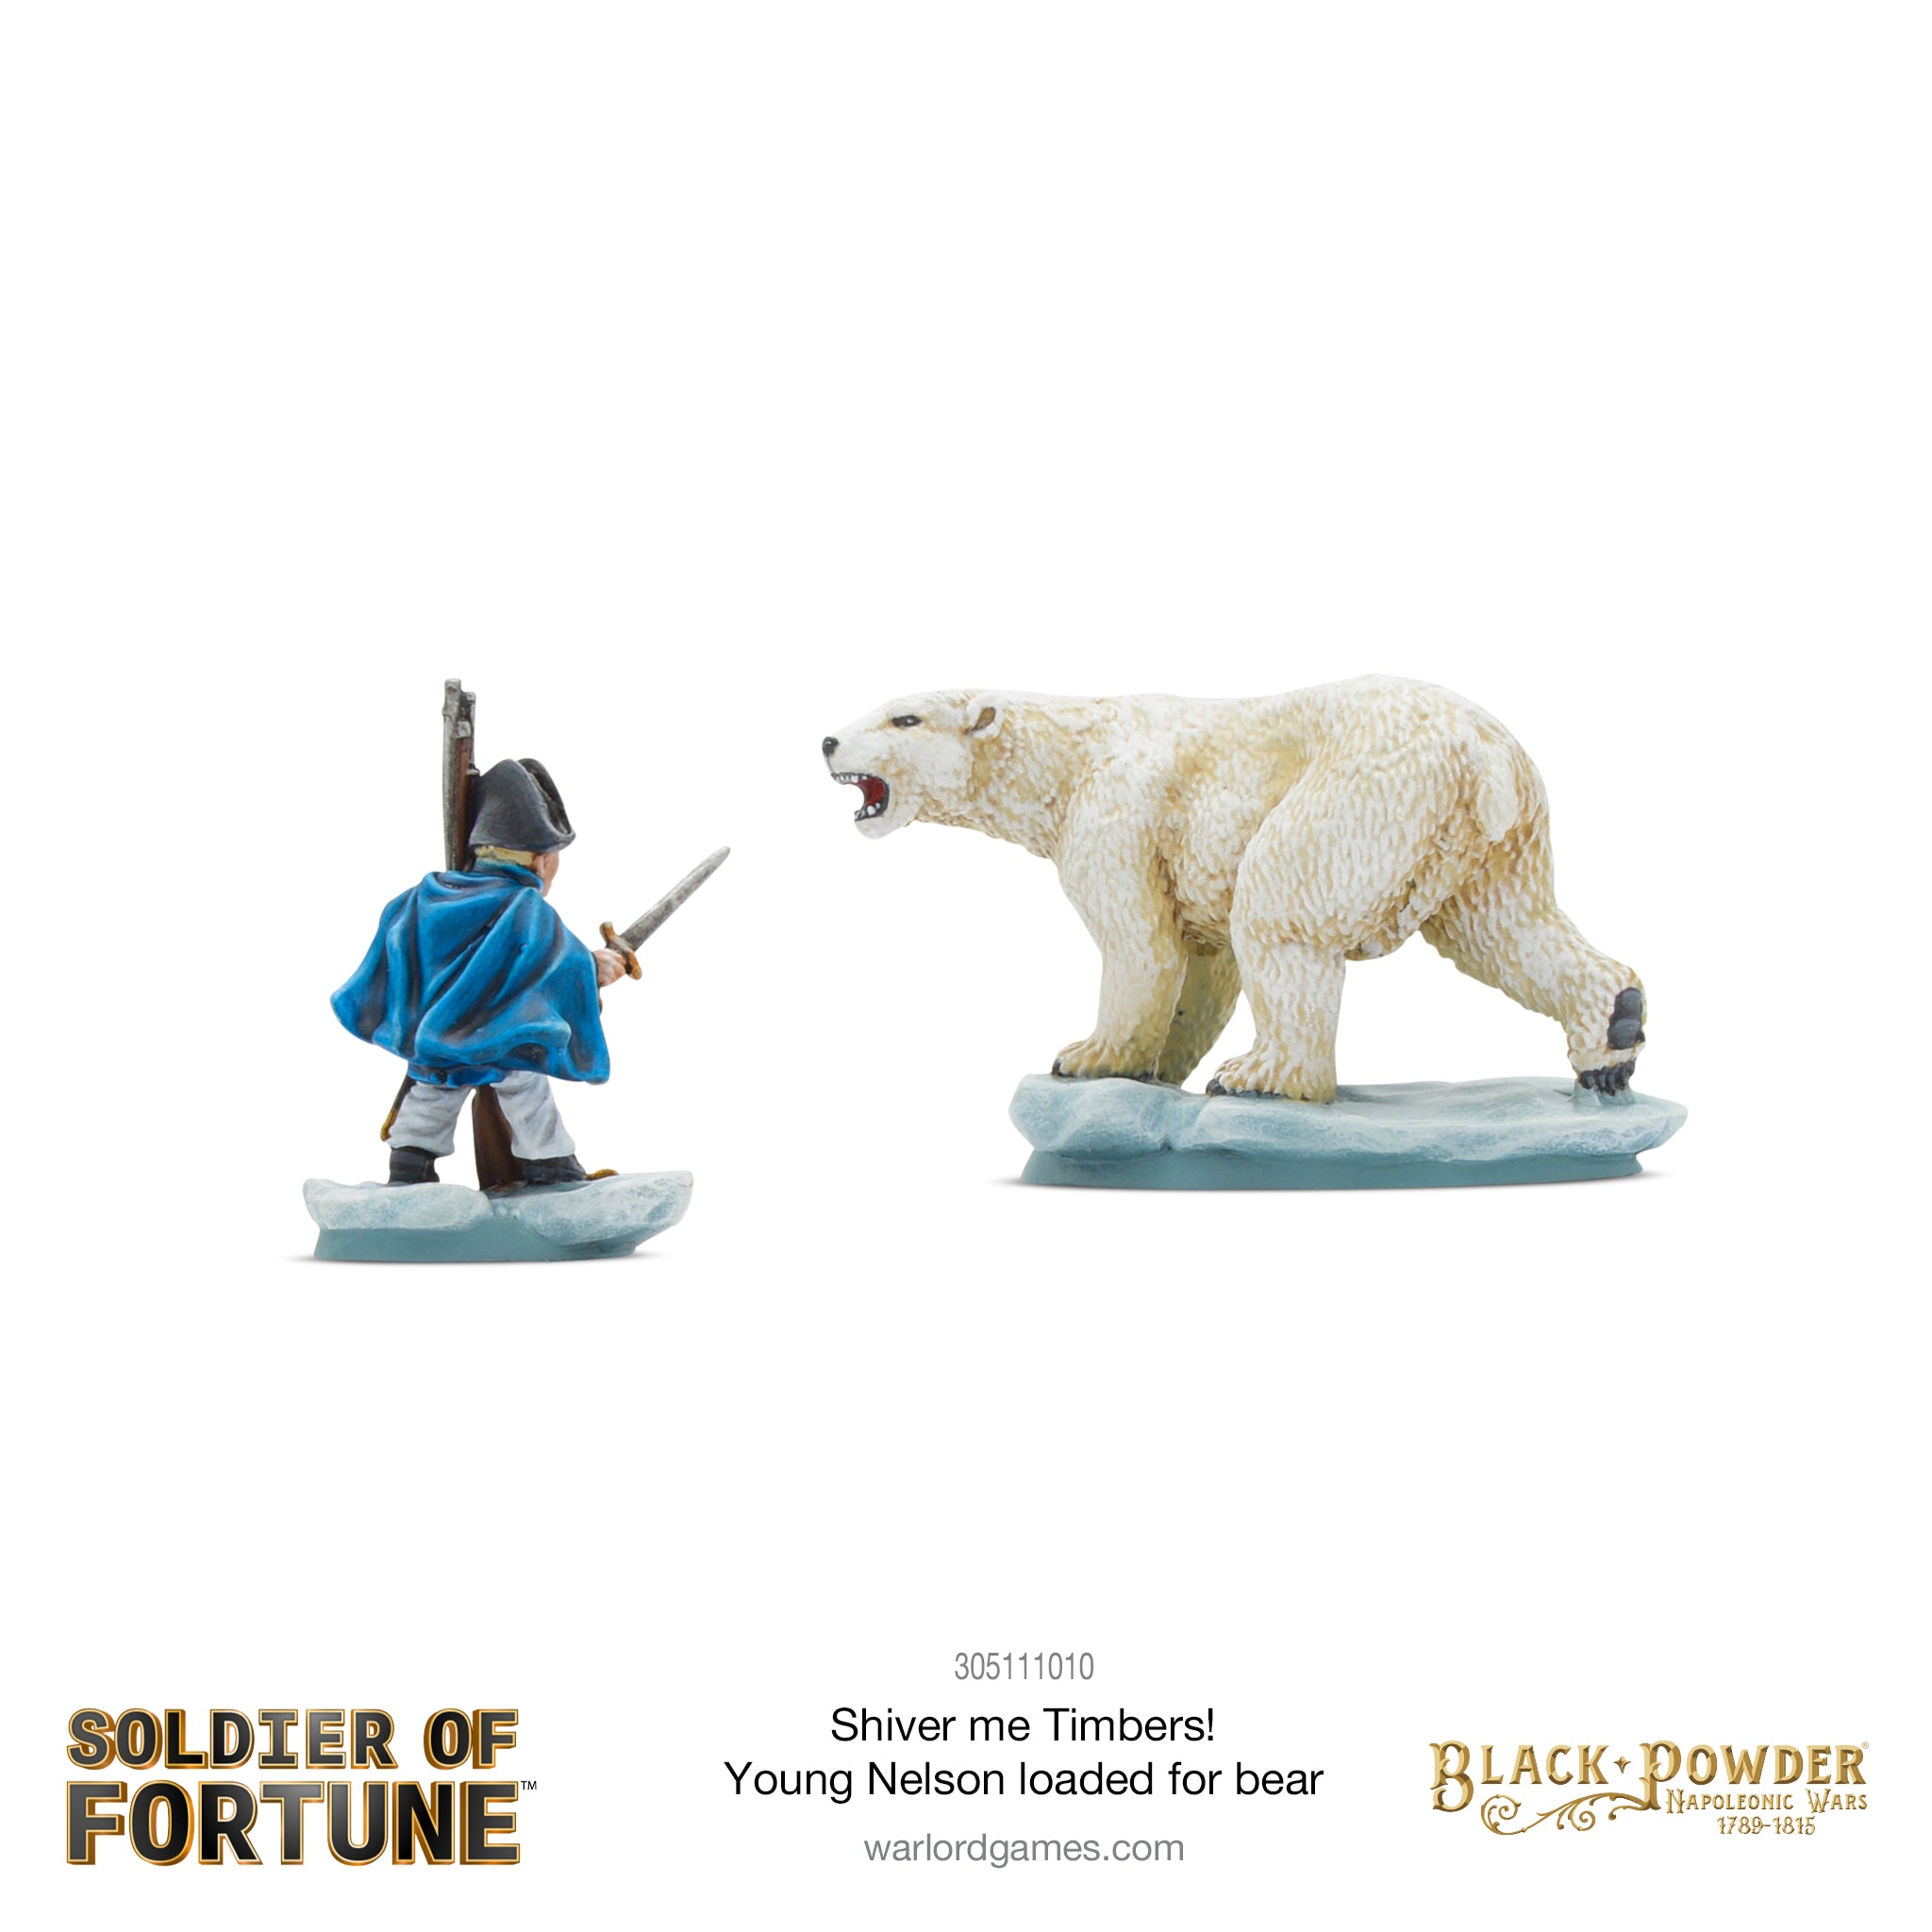 Soldier of Fortune 010: Shiver me Timbers! (Young Nelson loaded for bear)